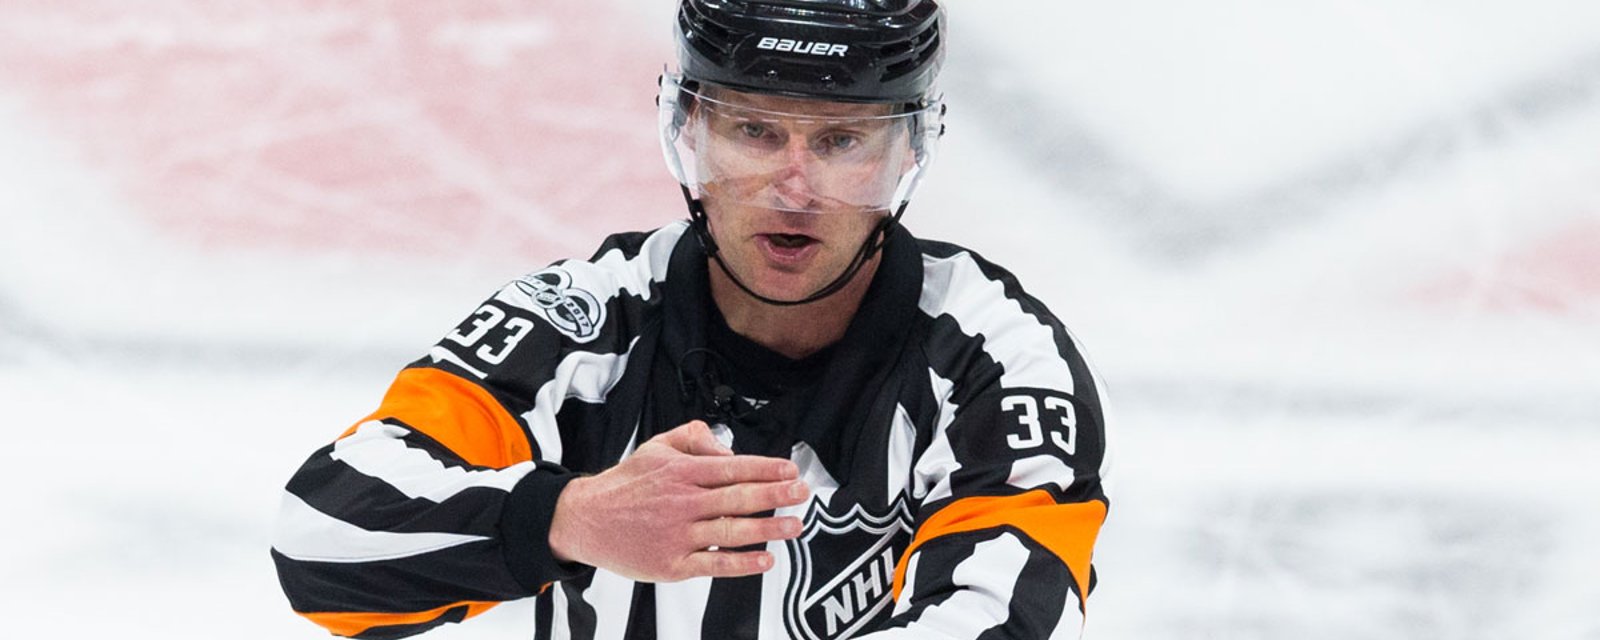 Breaking: NHL referees told to back off!